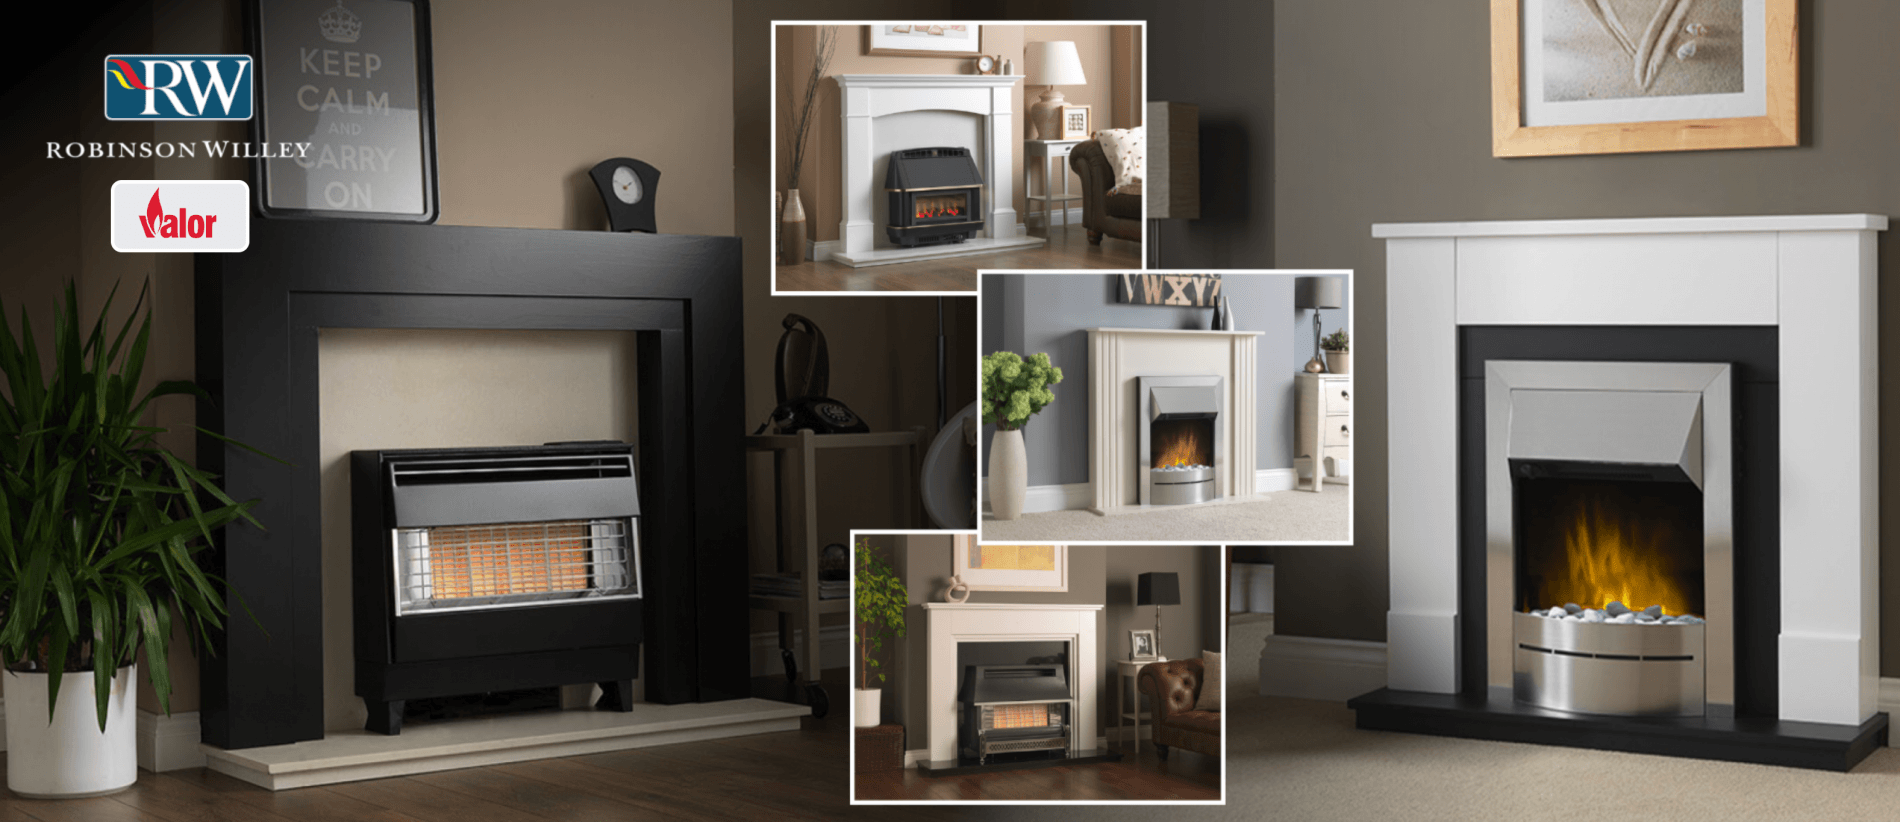 robinson willey fireplaces